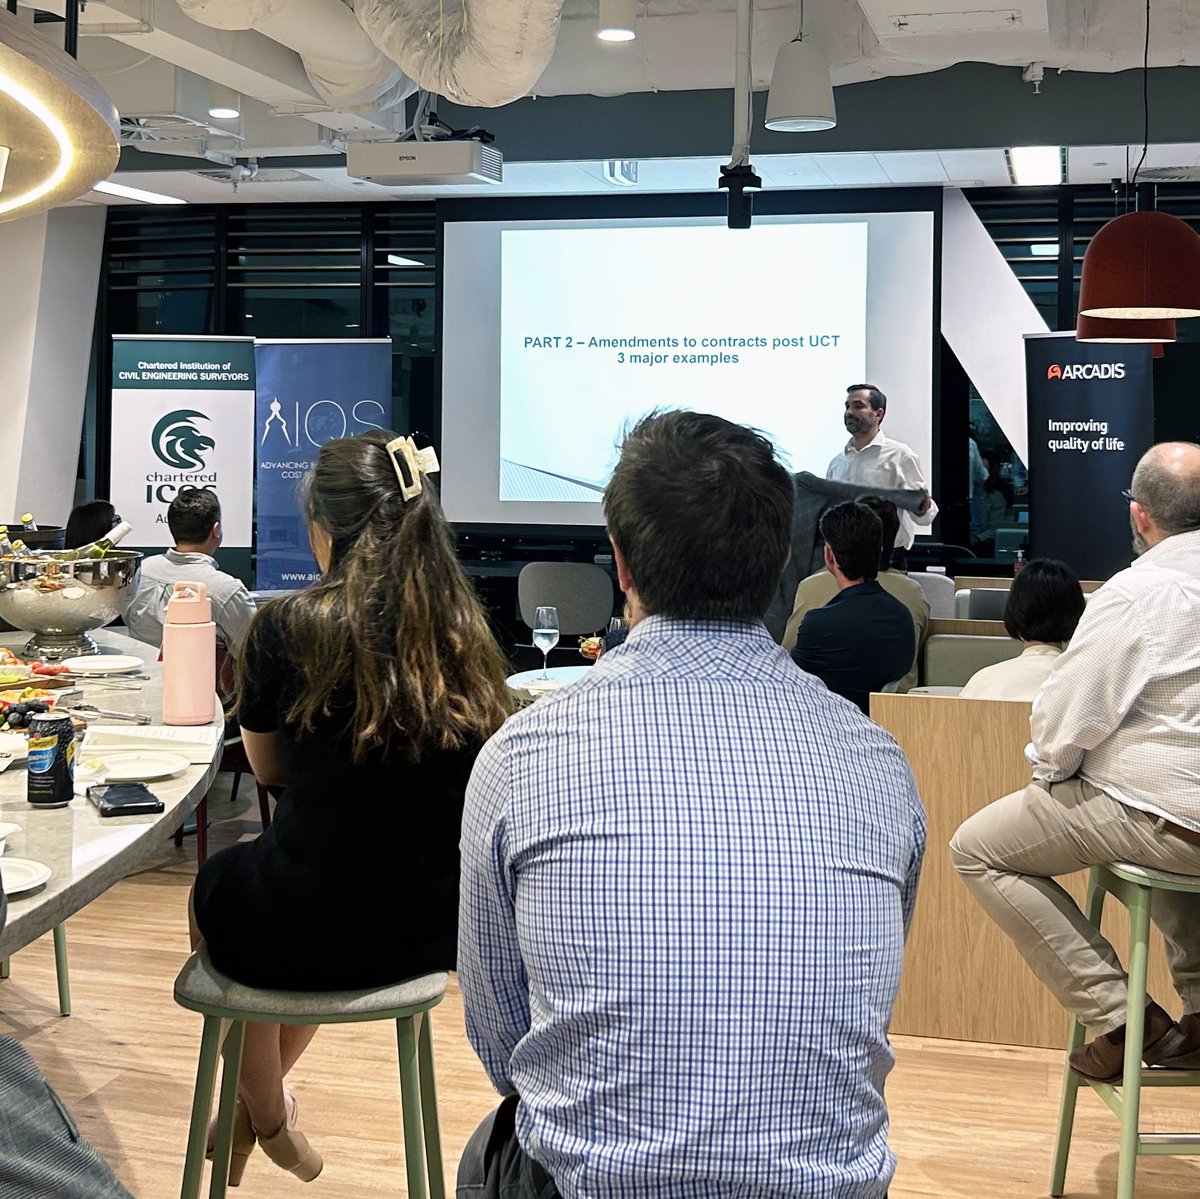 Another successful #Australia event - thanks all who attended to learn about significant changes to the Australian Consumer Law📜

Thanks also:

✅Joint event hosts @aiqs
✅Alexander Tuhtan of Shand Taylor Lawyers
✅Venue Arcadis Australia Pacific

#surveying #CivilEngineering